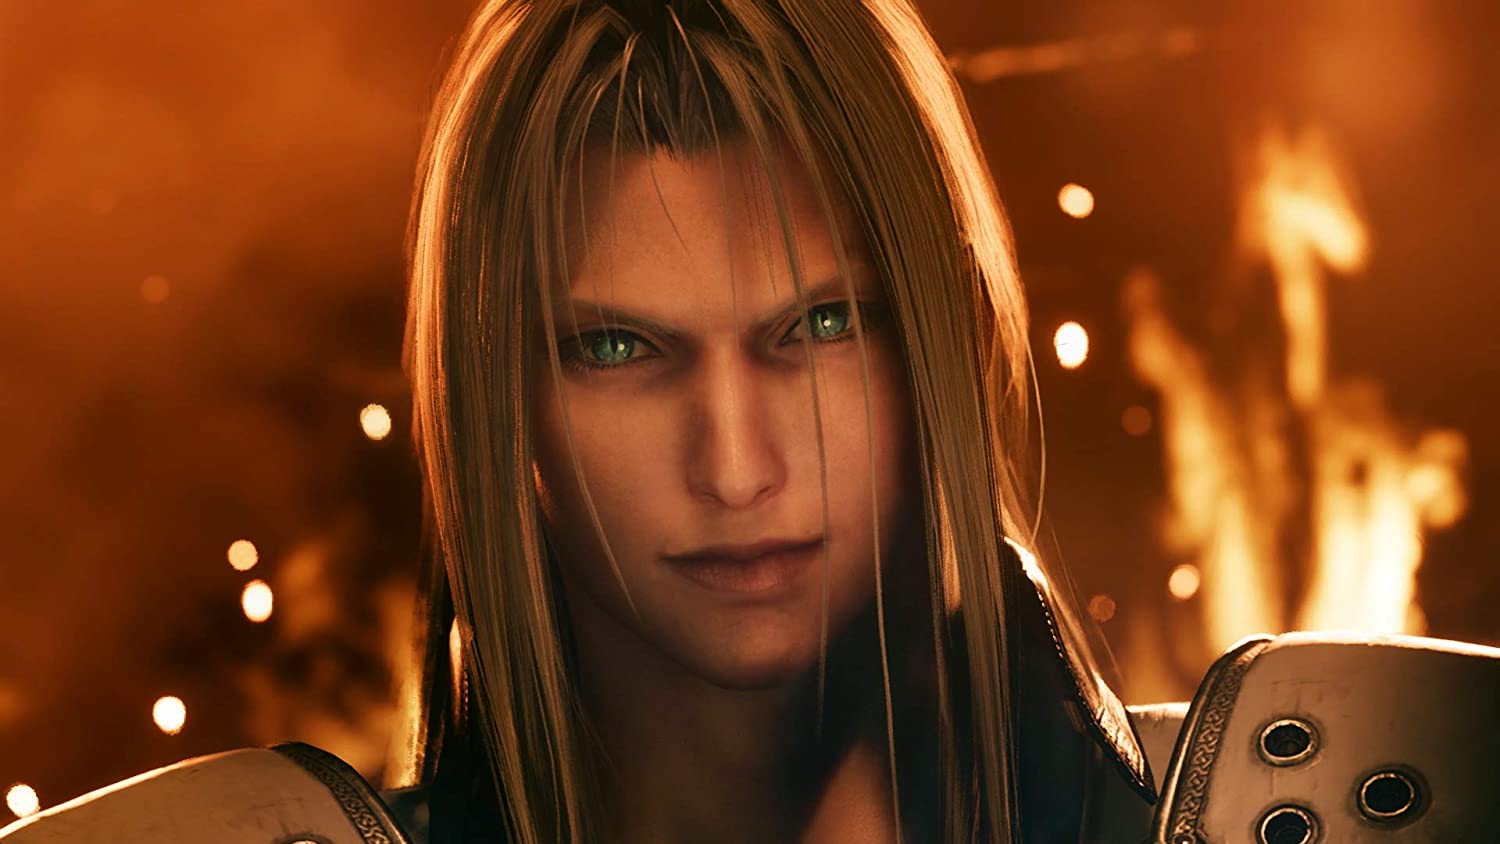 More FFVII Remake Part 2 News Will Appear in 2022